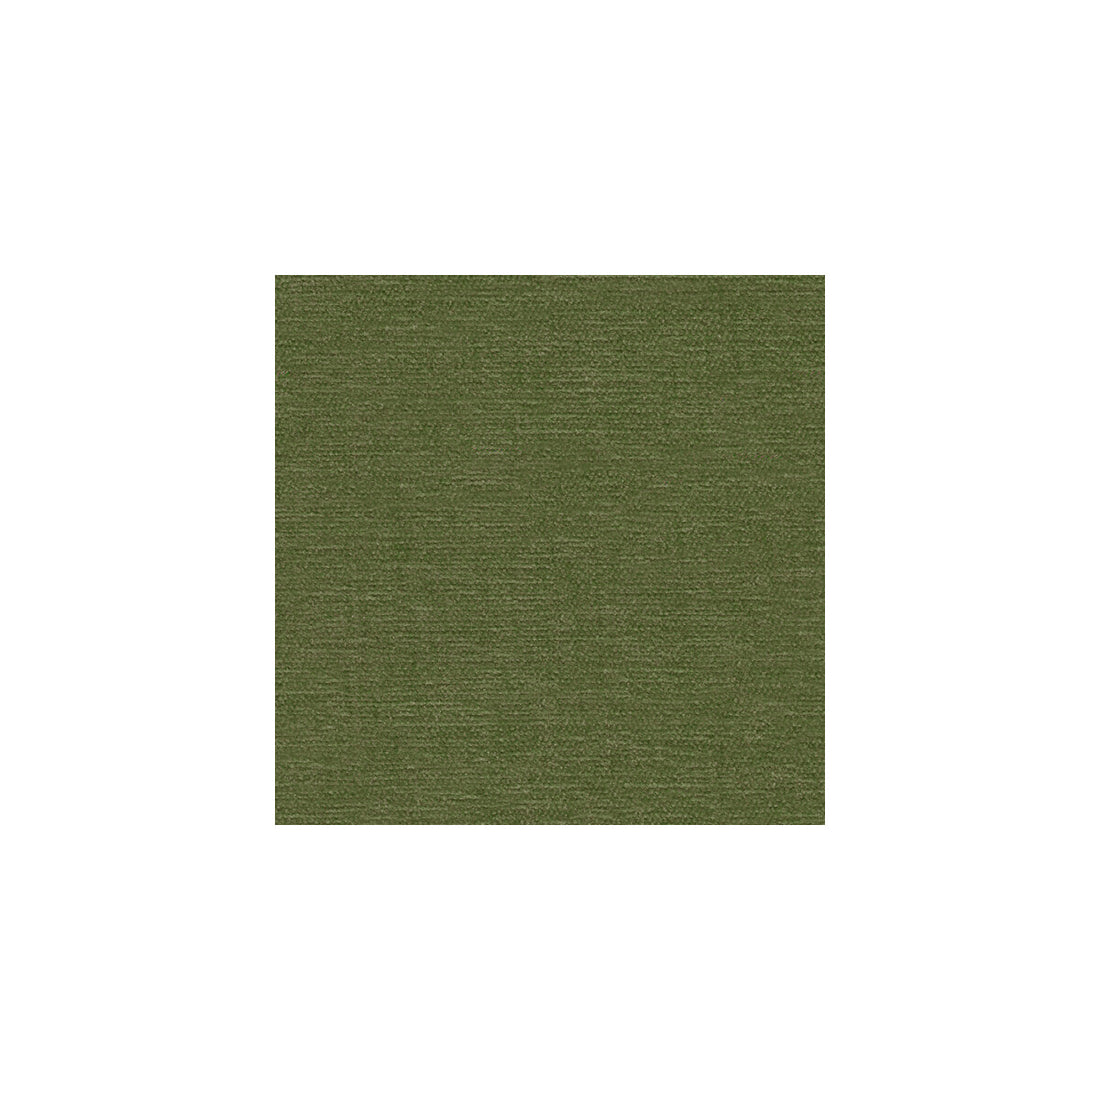 Kravet Contract fabric in 32148-3333 color - pattern 32148.3333.0 - by Kravet Contract